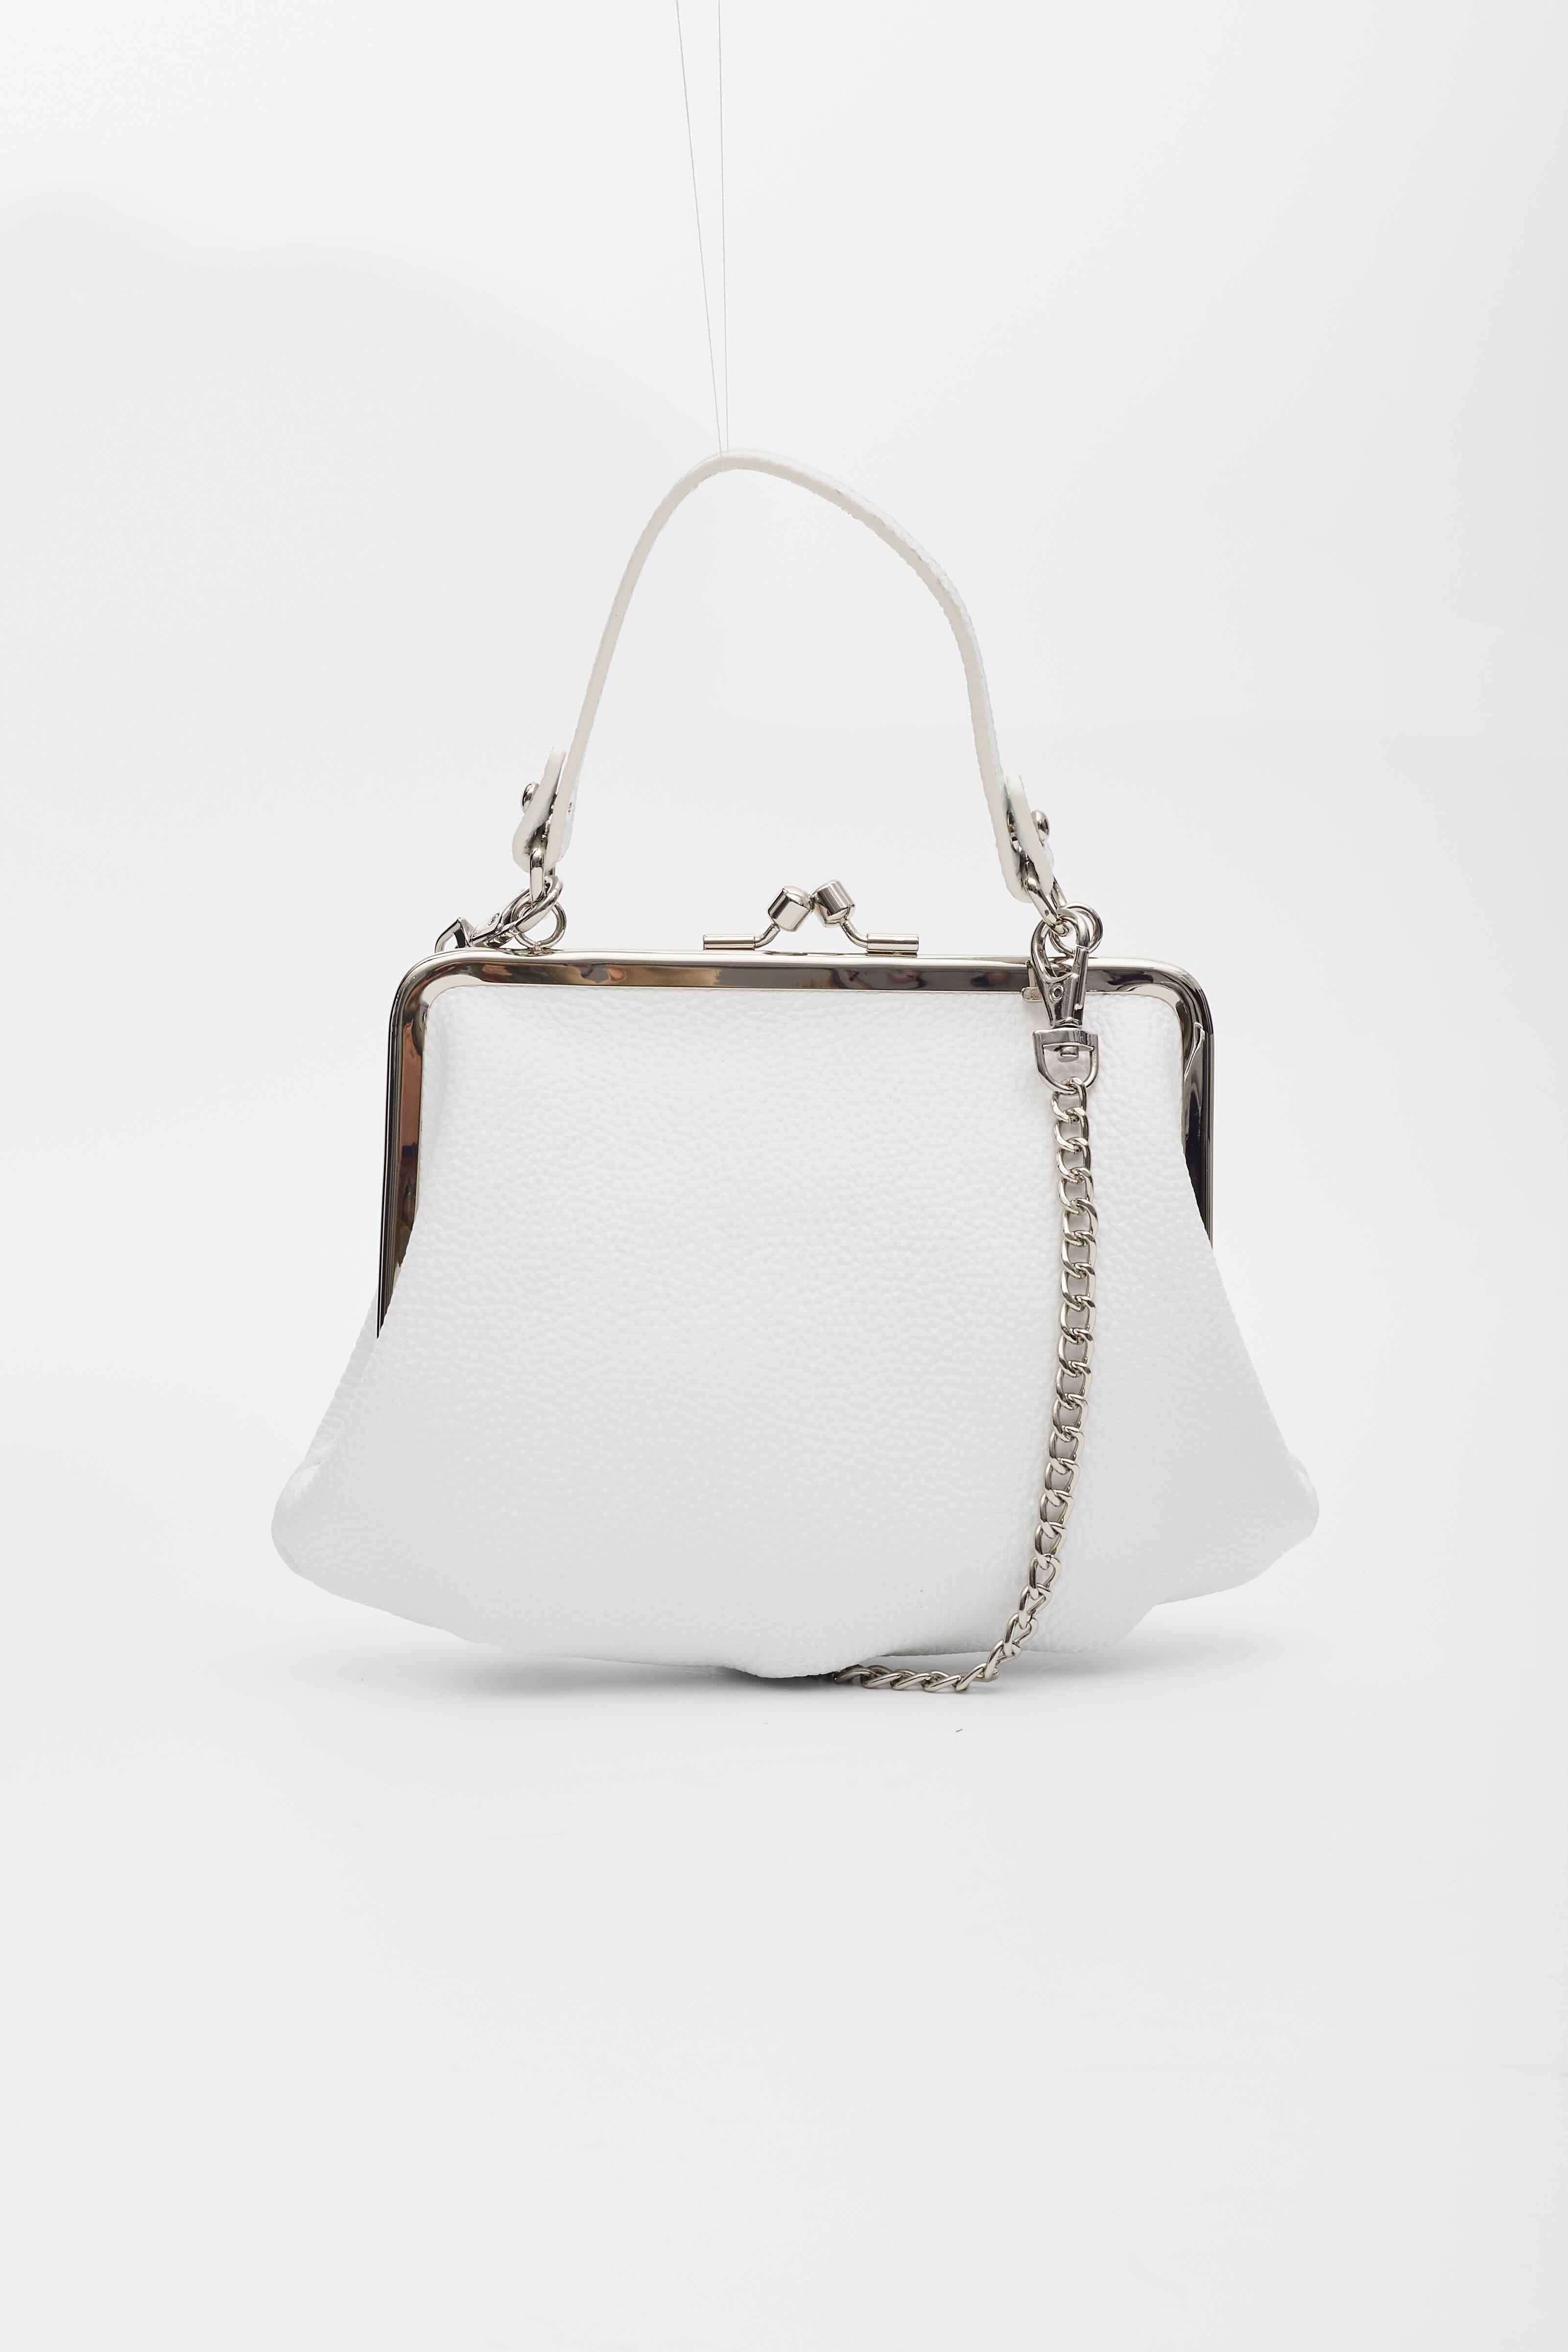 White. Made from nappa leather. Silver hardware. Signature Orb plaque detail. Clasp fastening. Main compartment with logo cotton lining. Long top handle Detachable chain-link shoulder strap.

Material: Leather
Measures: Height 4.7” x Length 6.7” x